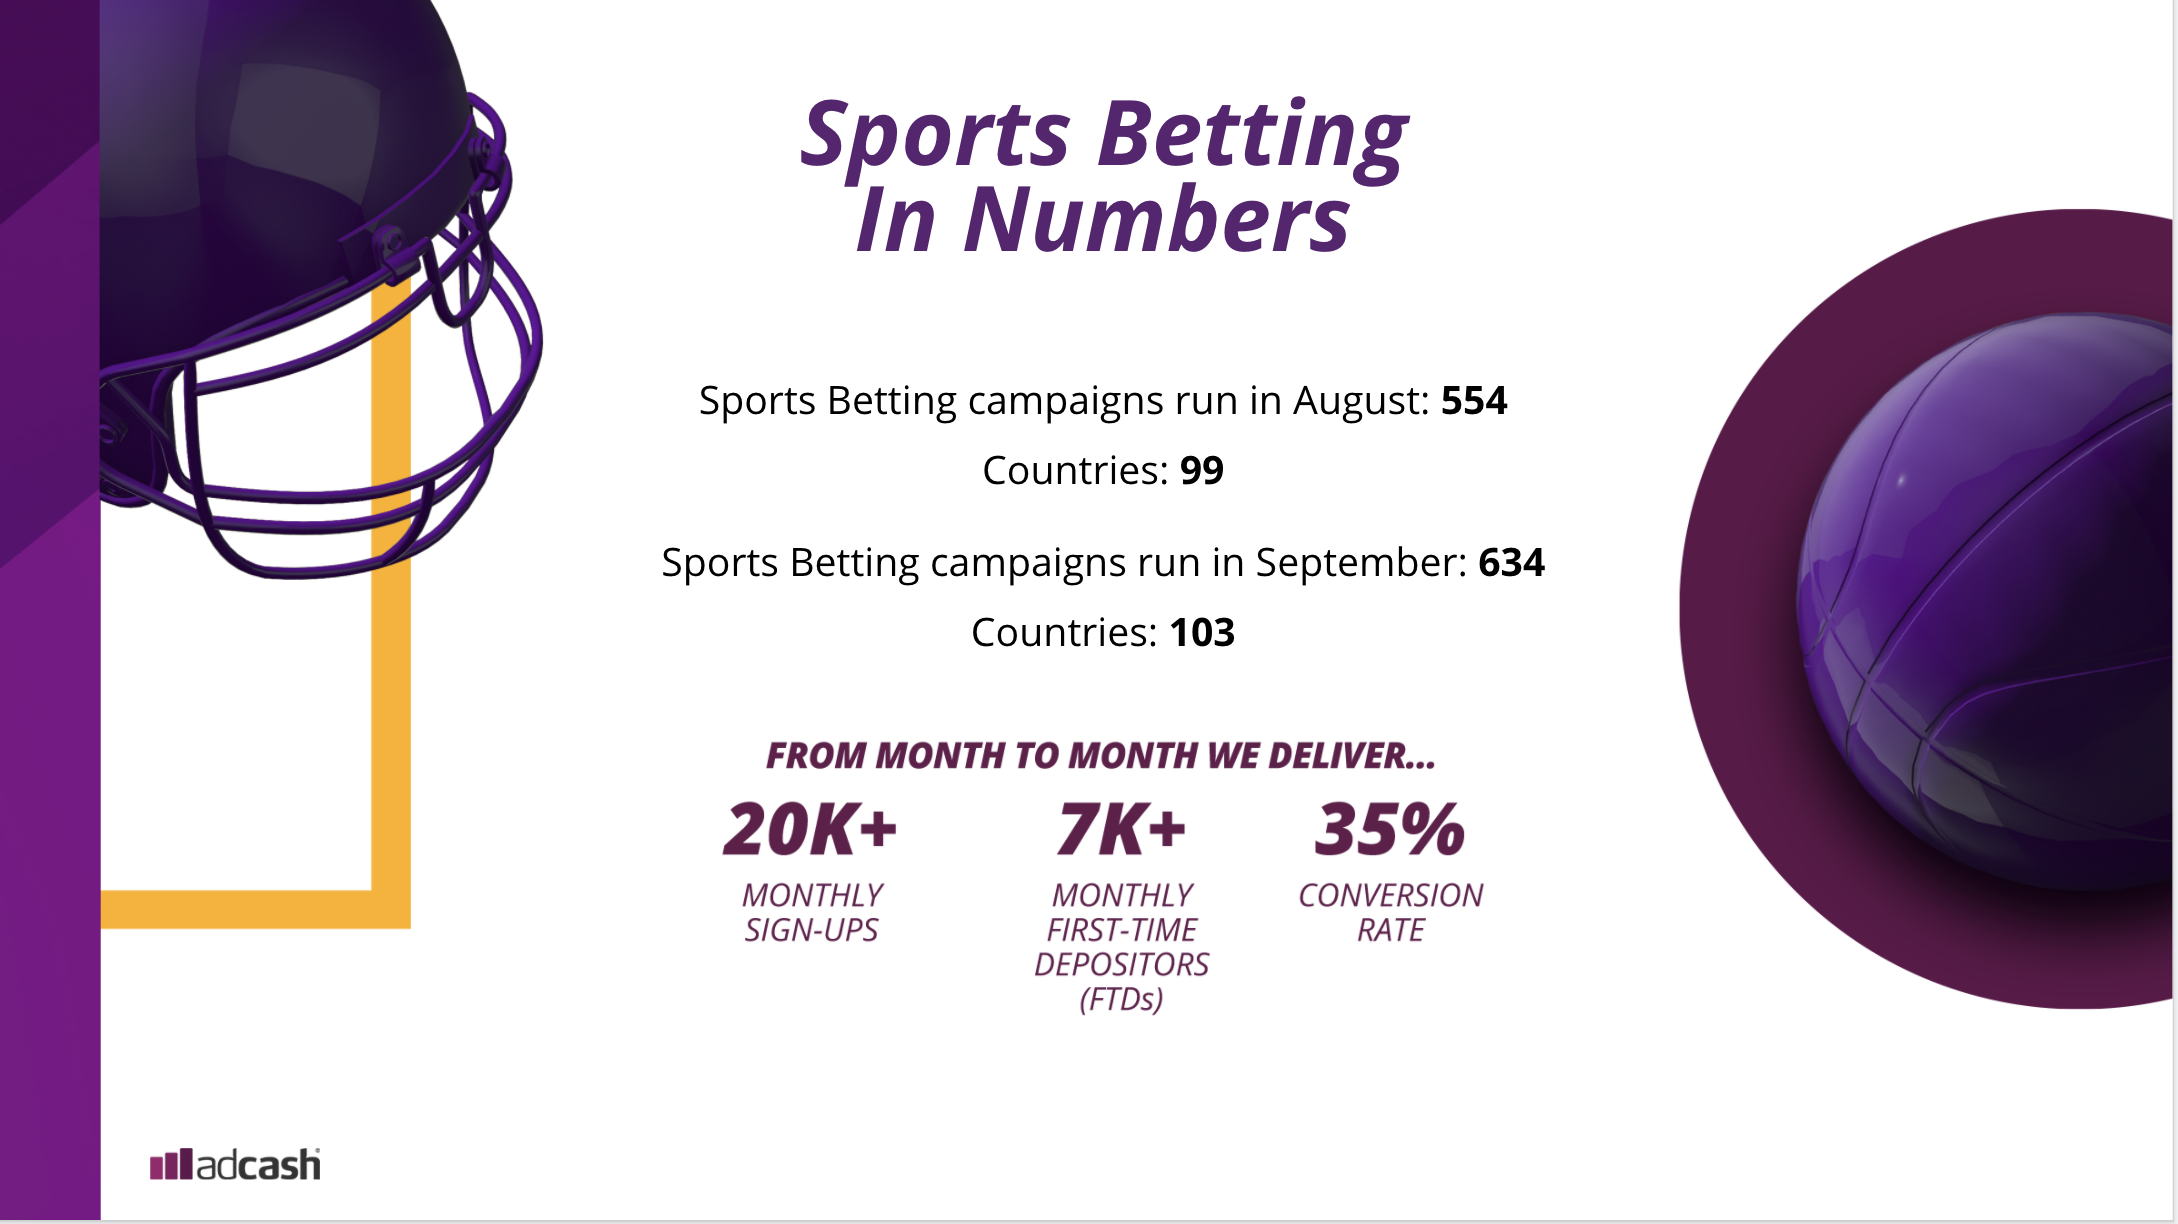 Adcash - Online Advertising - Sports Betting Verticals 2020